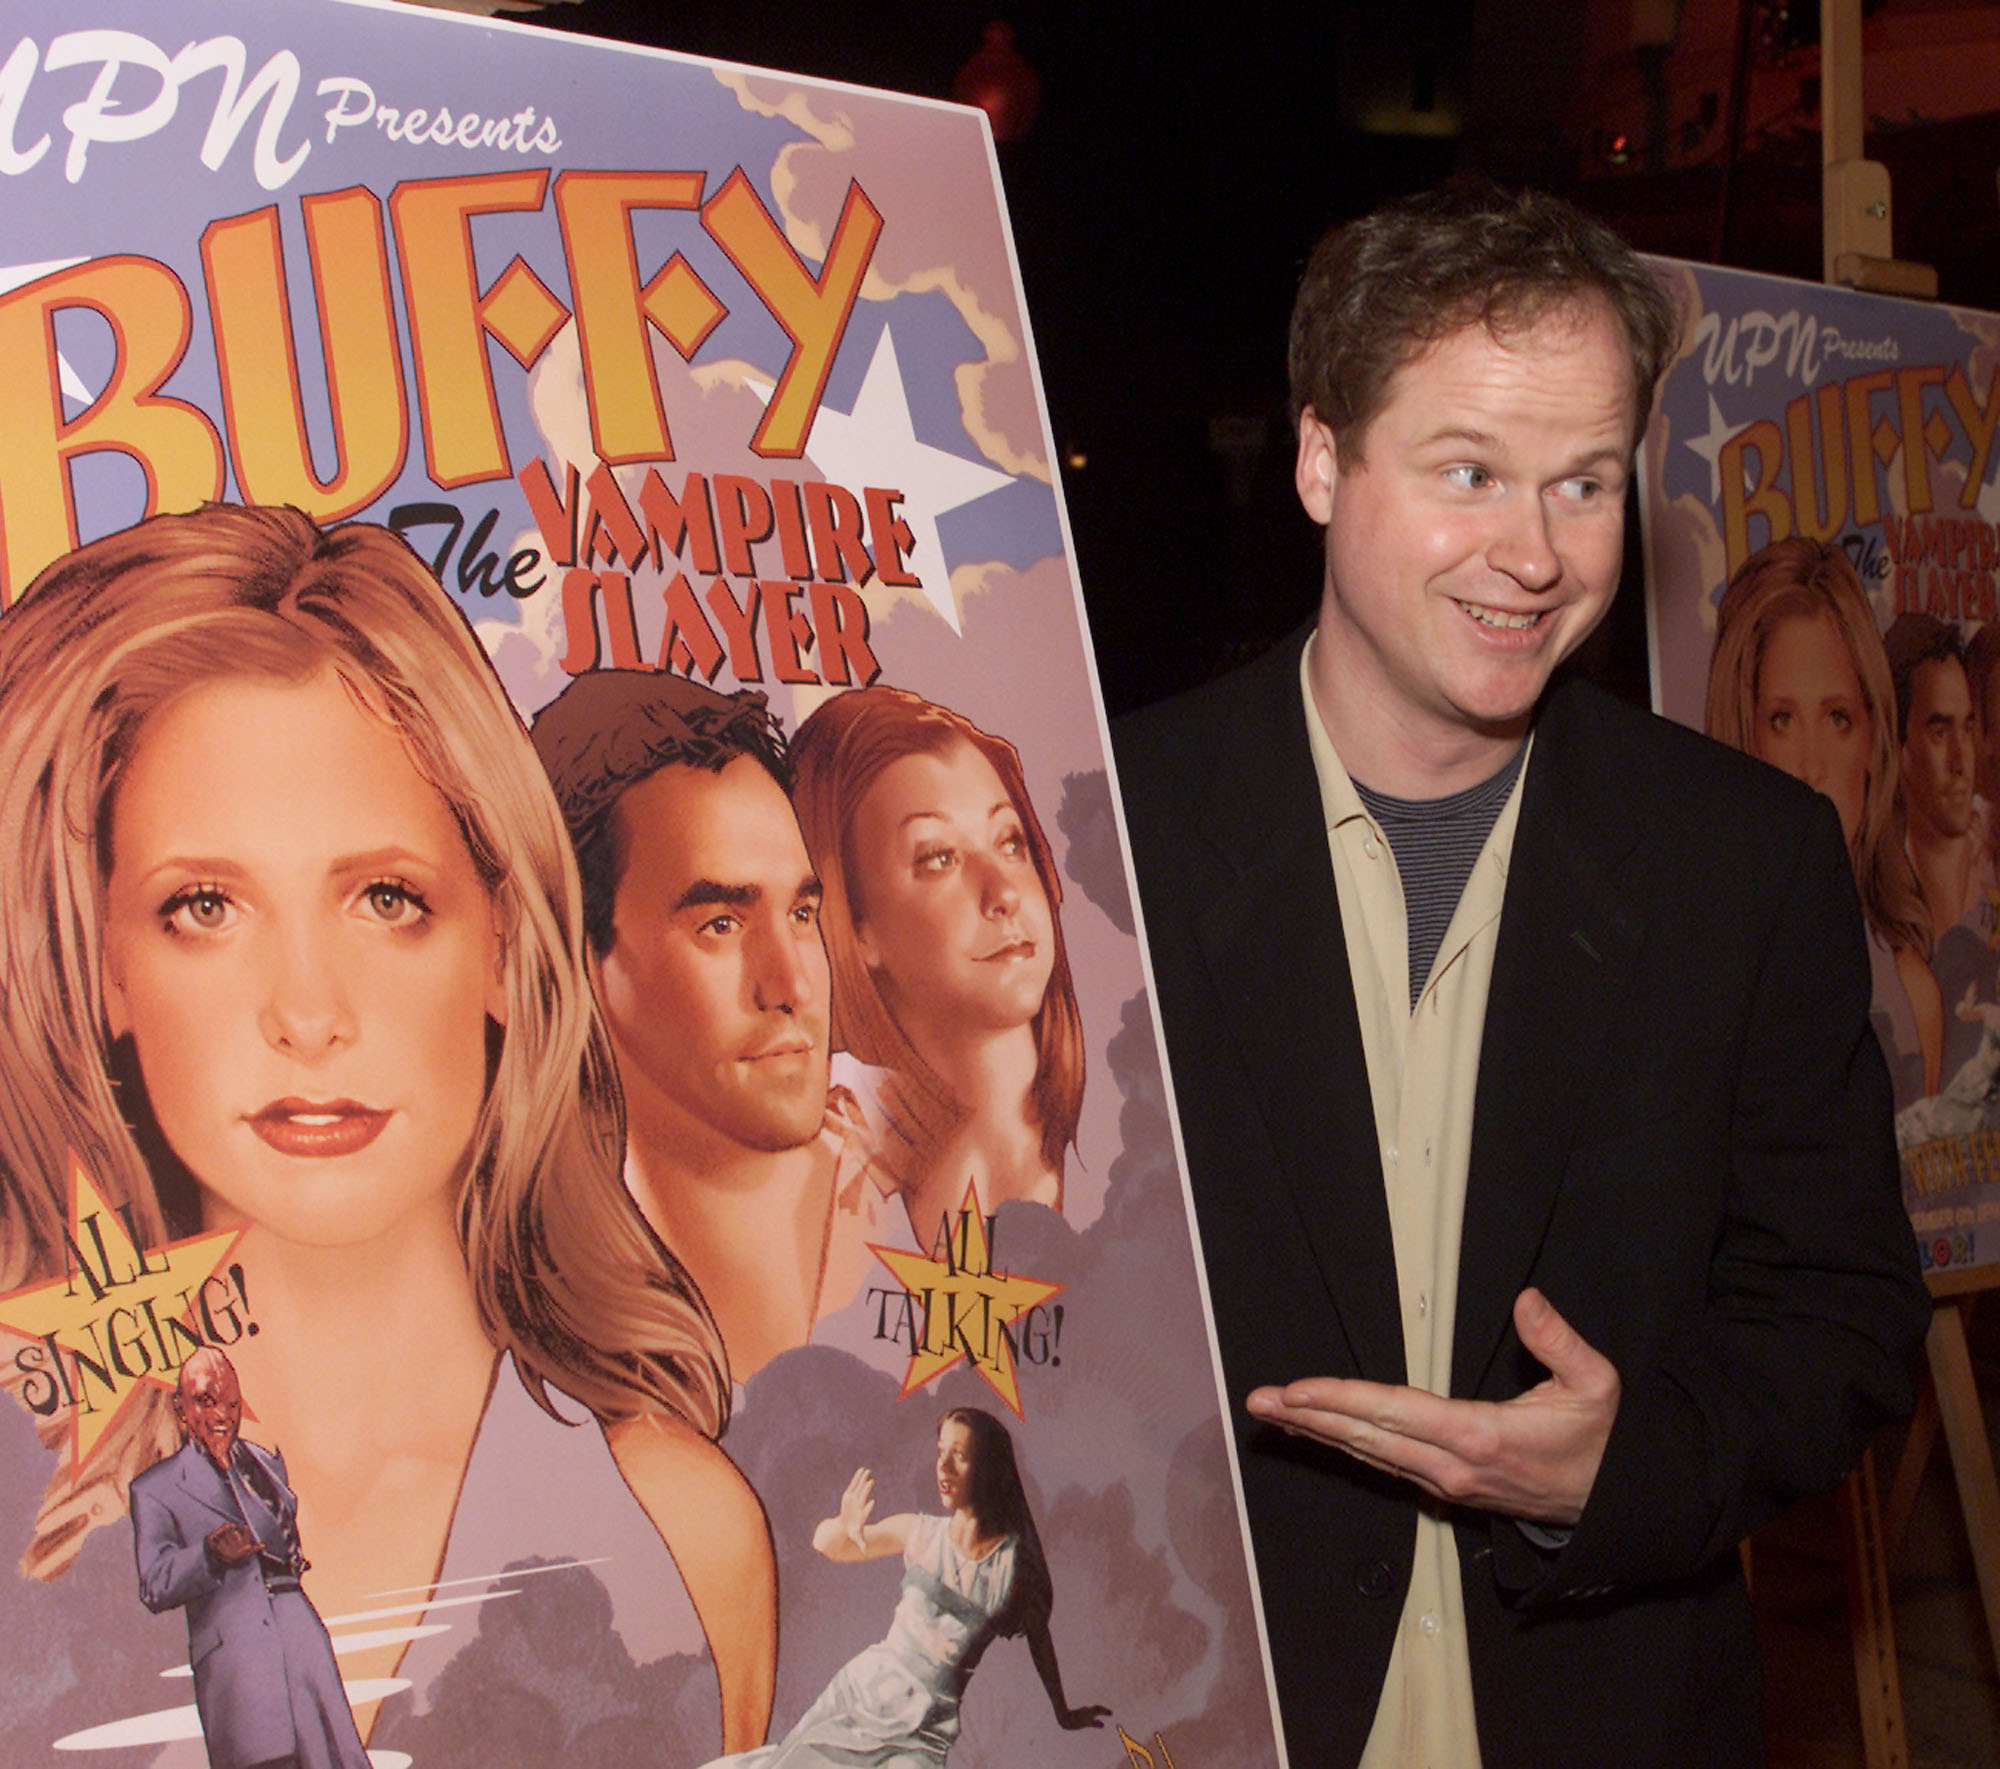 Joss Whedon at a screening of "Once More With Feeling", the musical episode of 'Buffy, The Vampire Slayer' on November 2, 2001